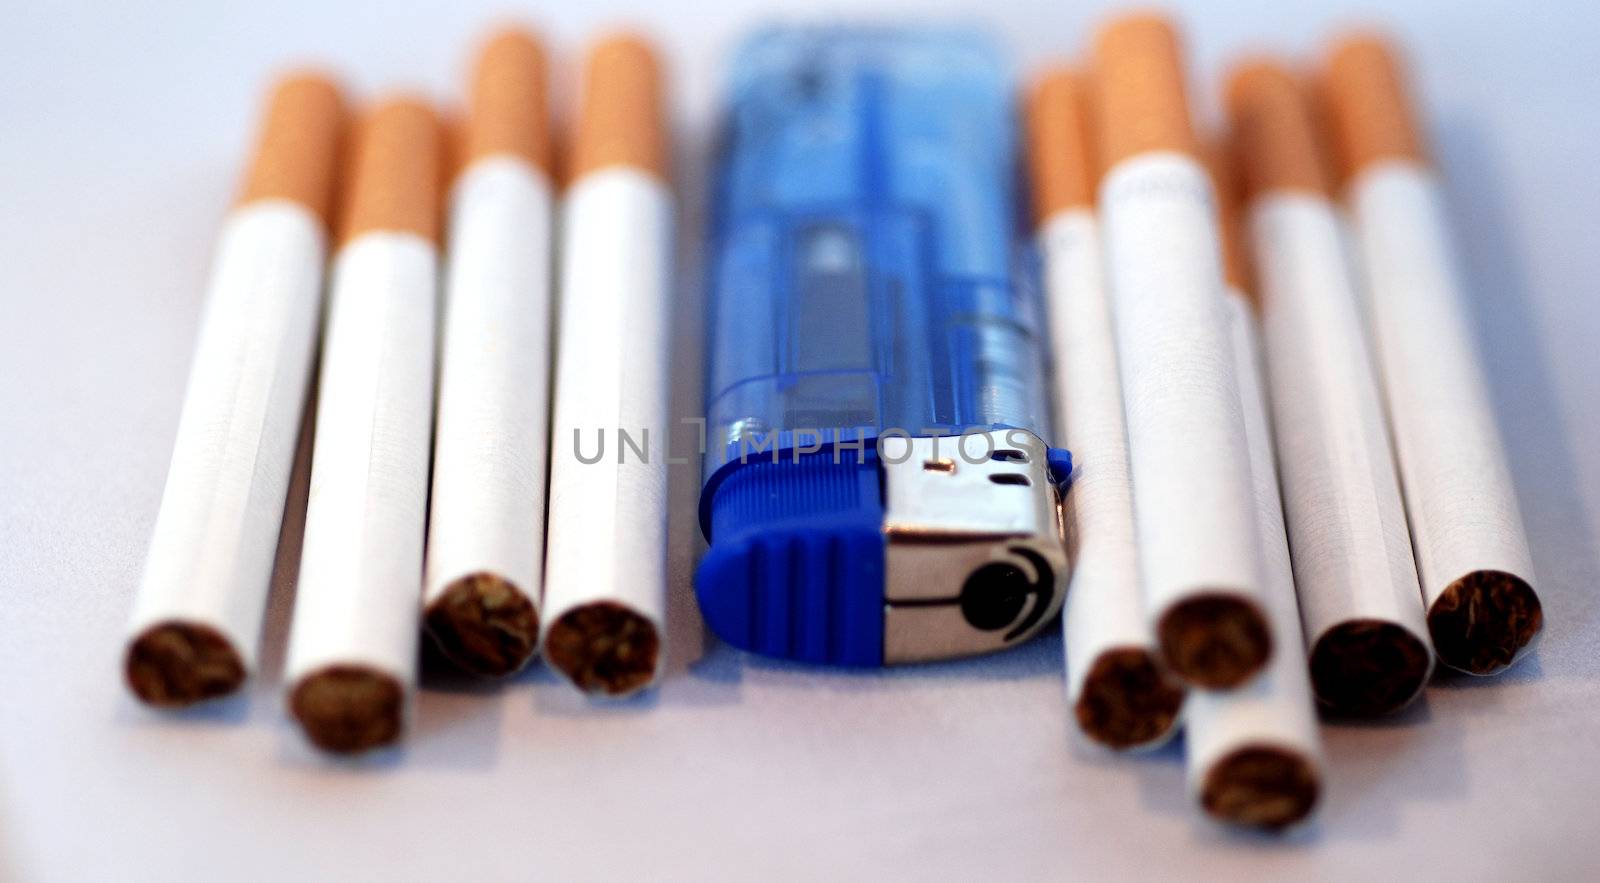 A close up photograph of cigarettes and a blue lighter